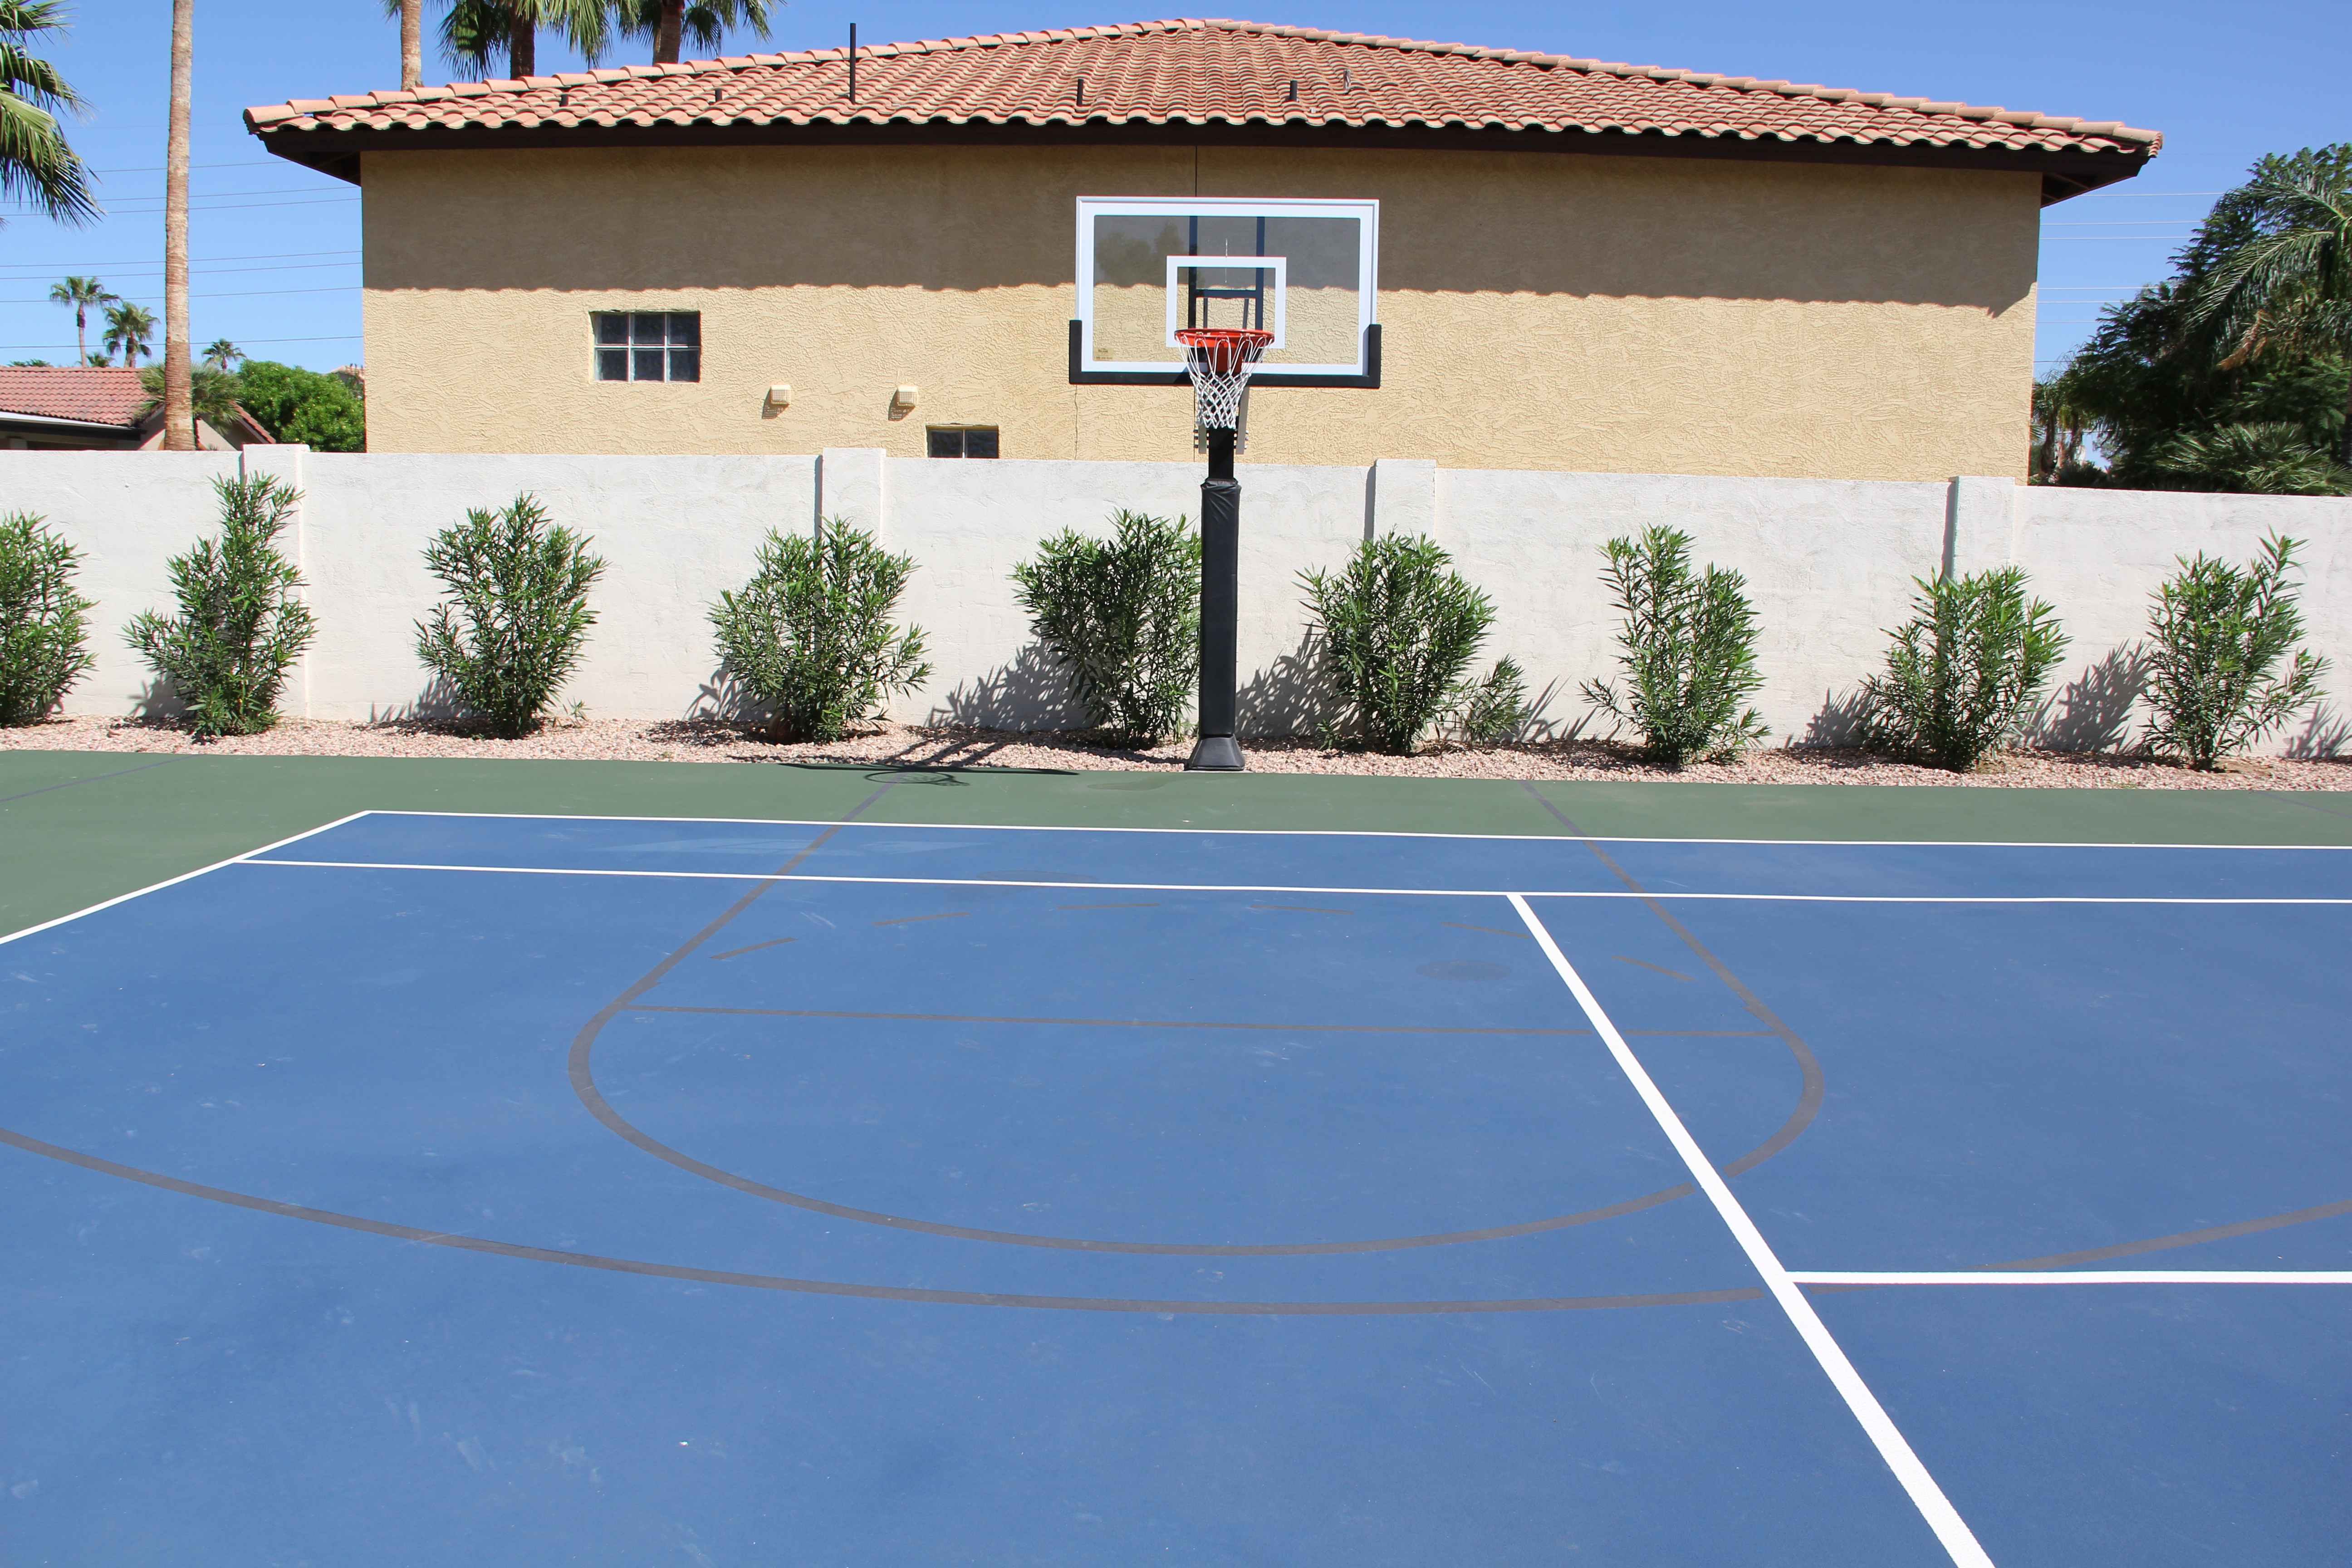 If you have a tennis court, then you can always add a basketball hoop to your tennis court.